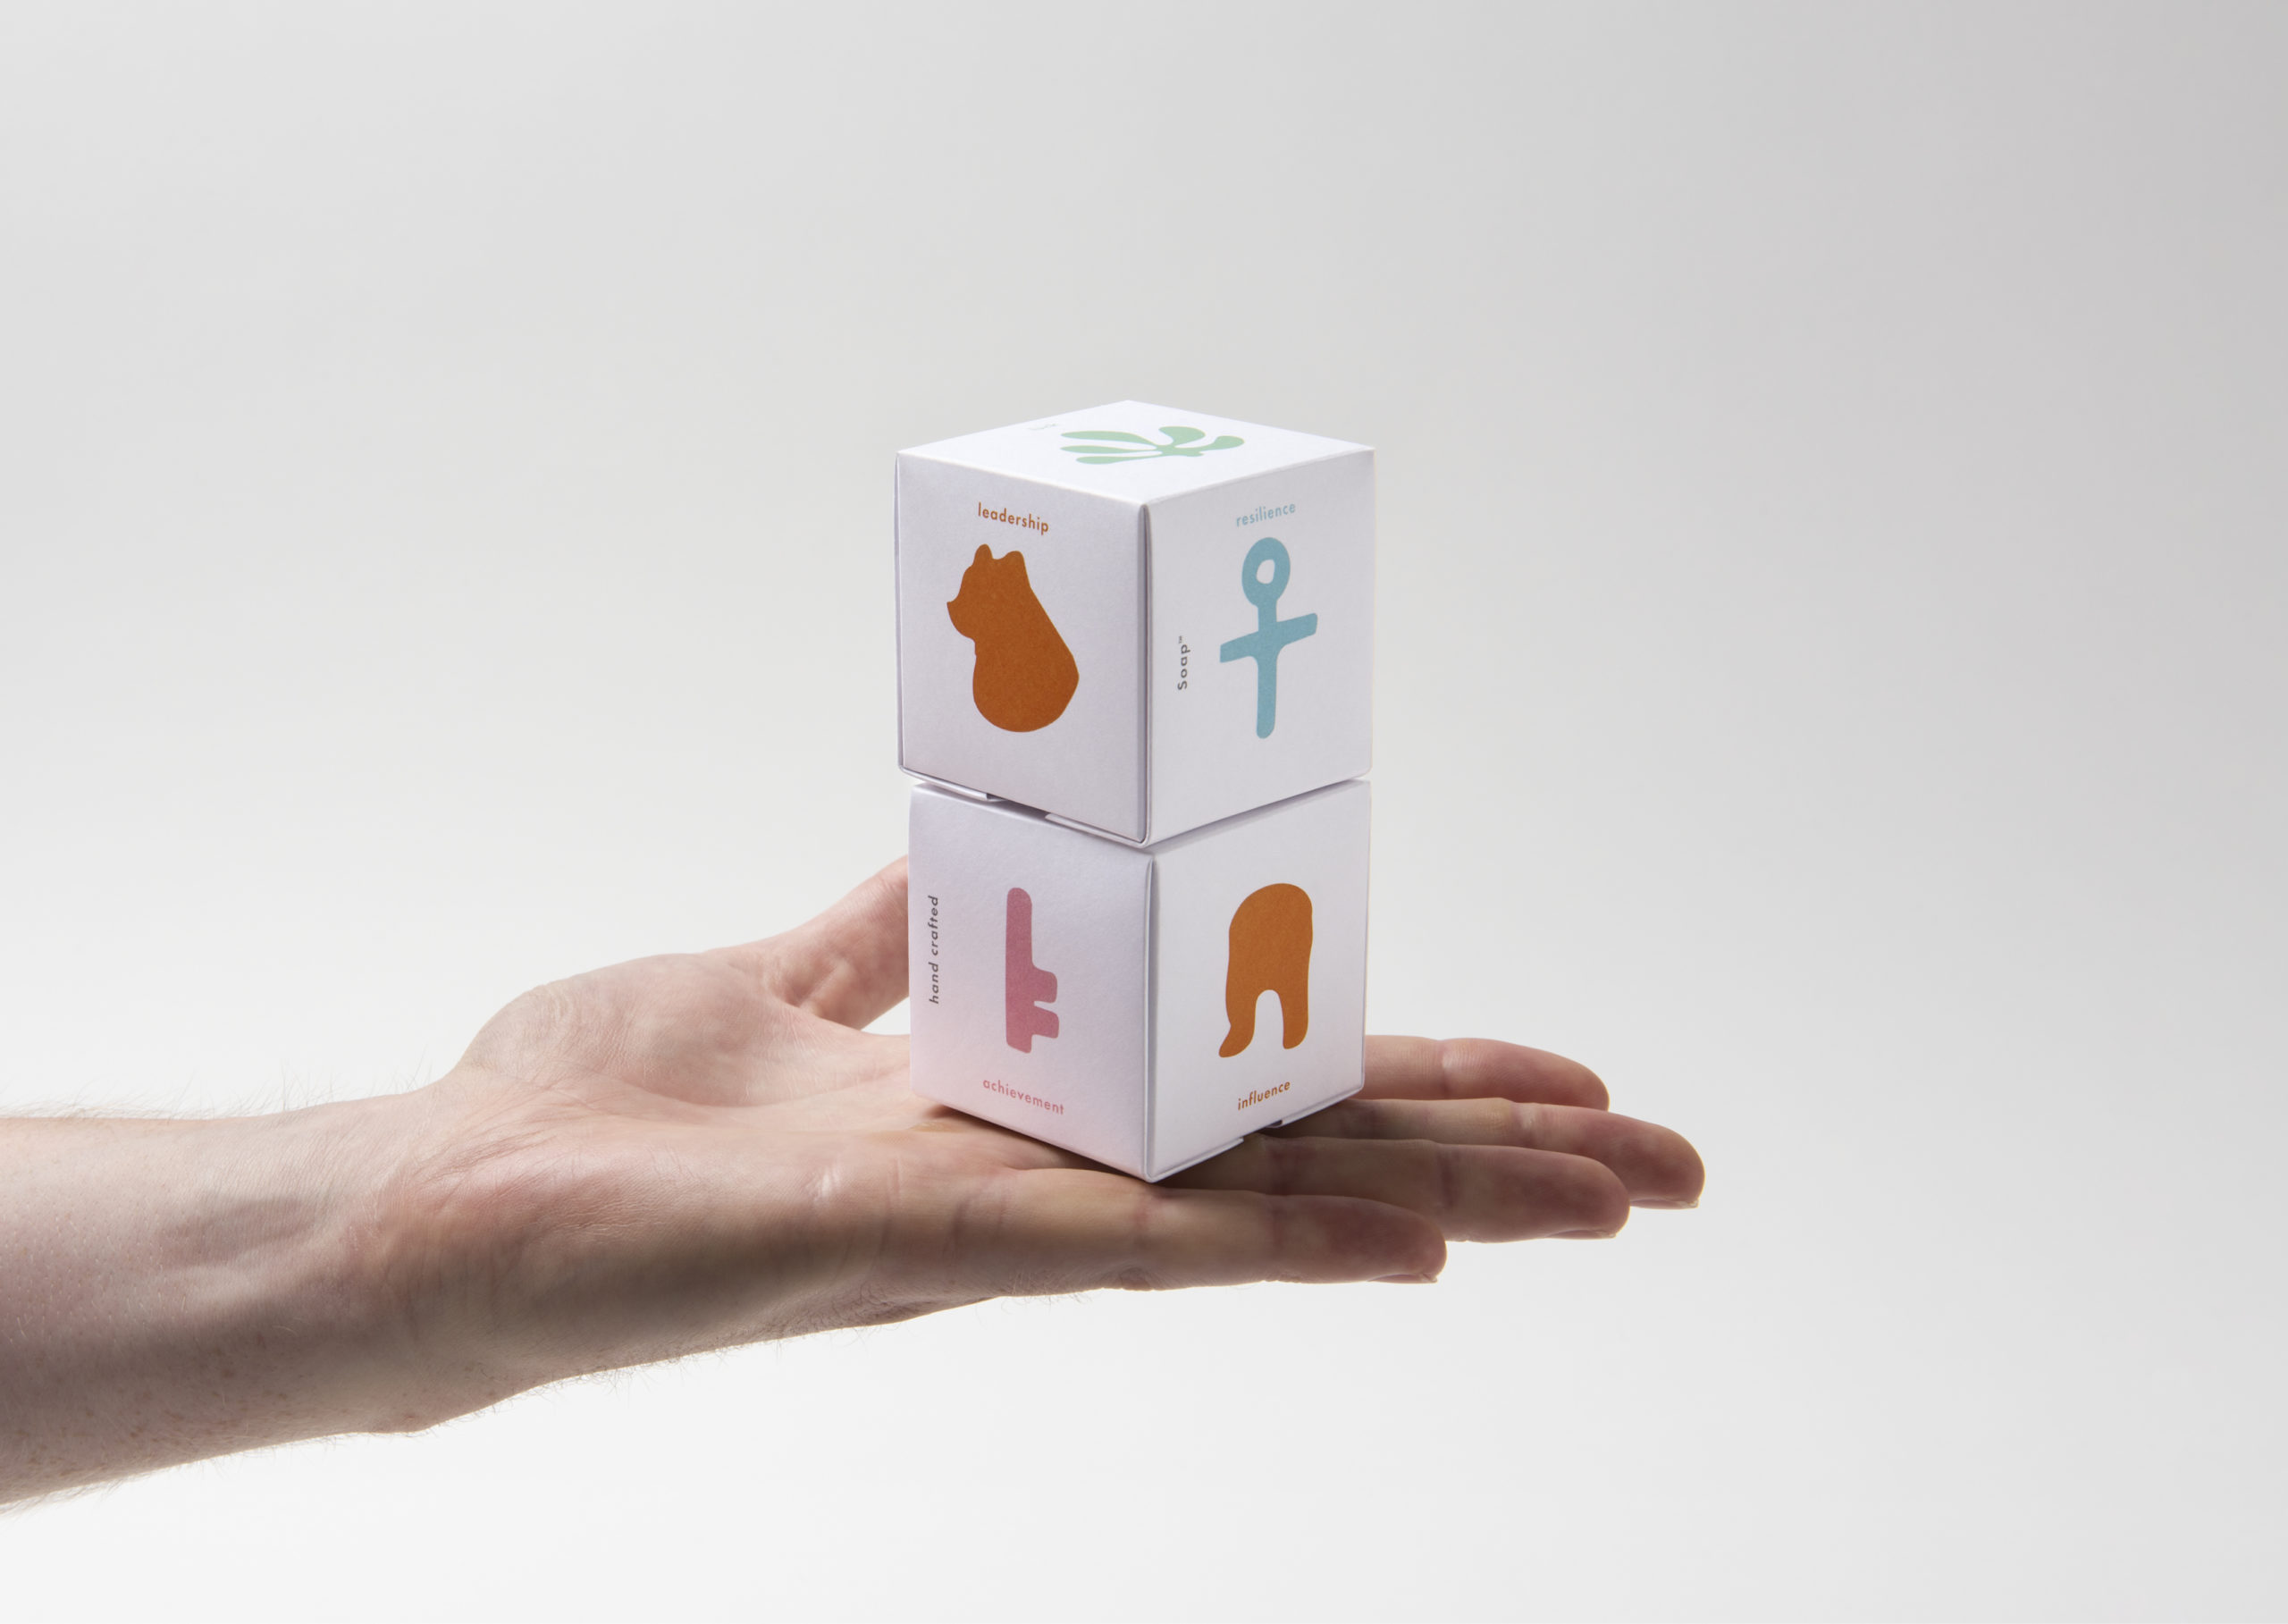 Two stack of beautifully illustrated soap packaging in palm of hand